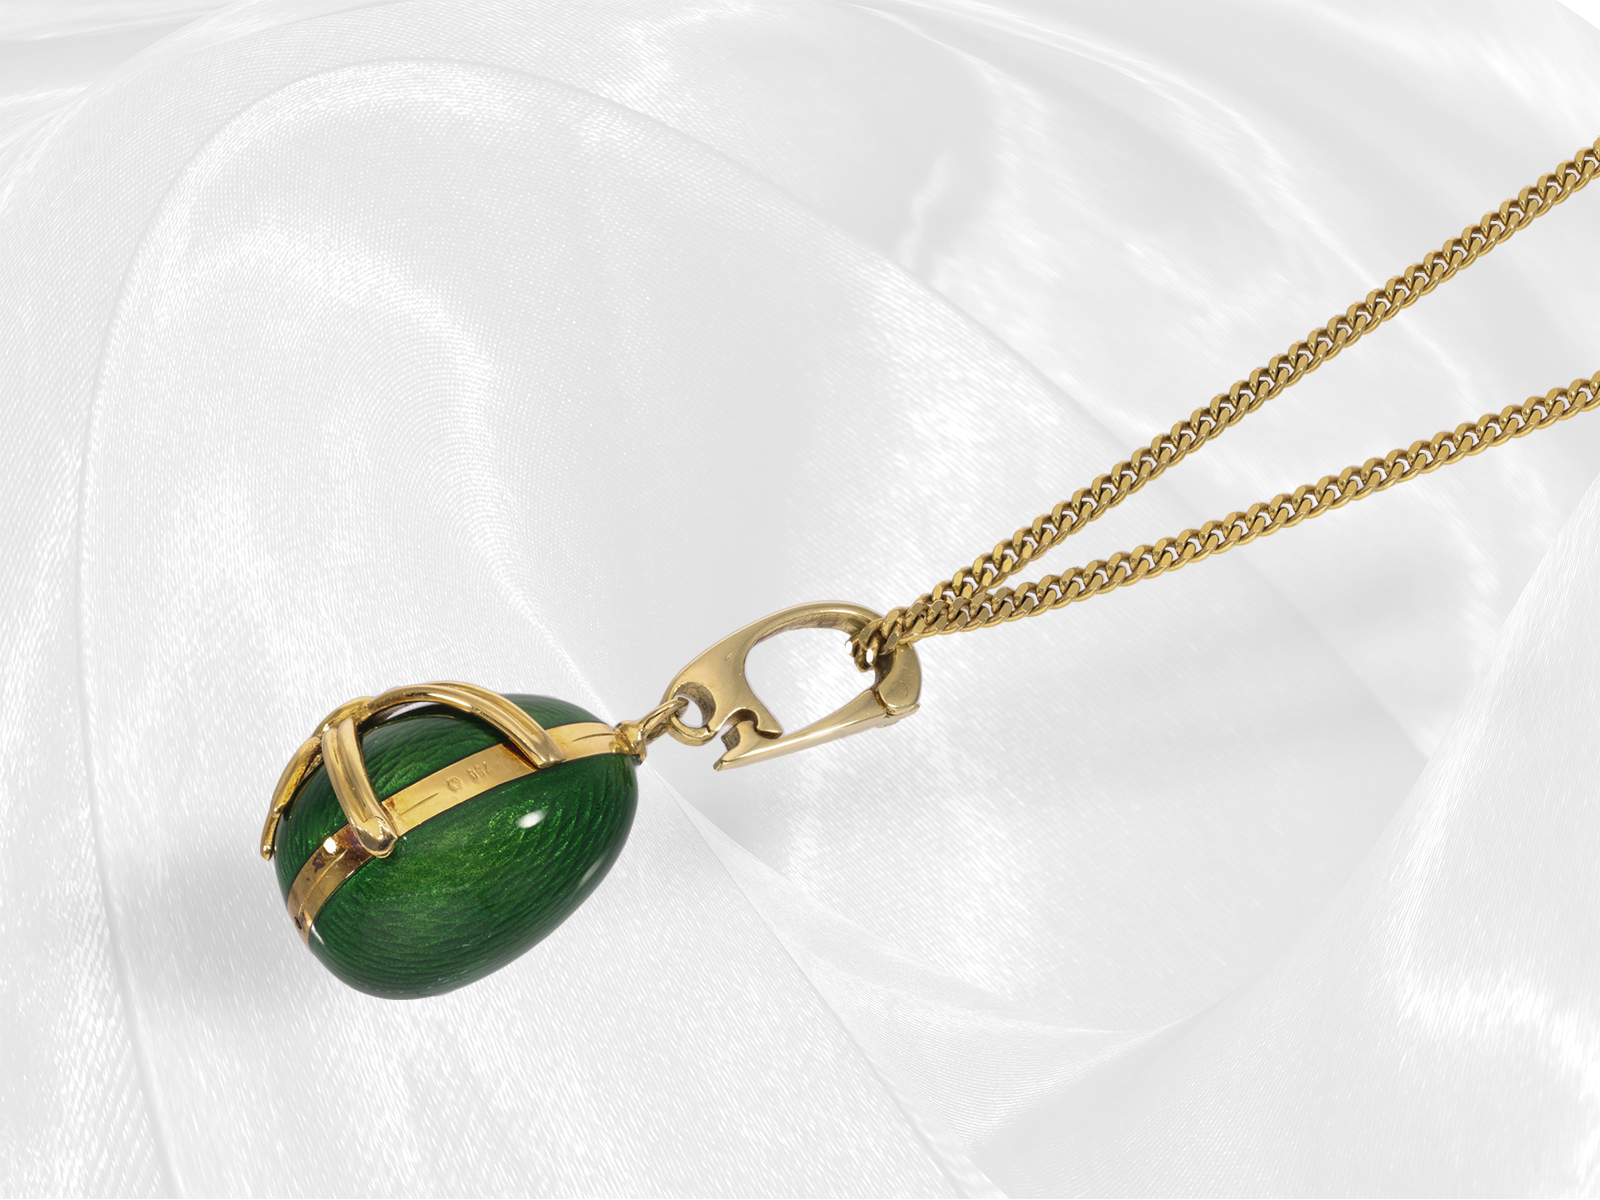 High-quality Fabergé enamel pendant with brilliant-cut diamonds, 18K gold, limited edition, with nec - Image 8 of 12